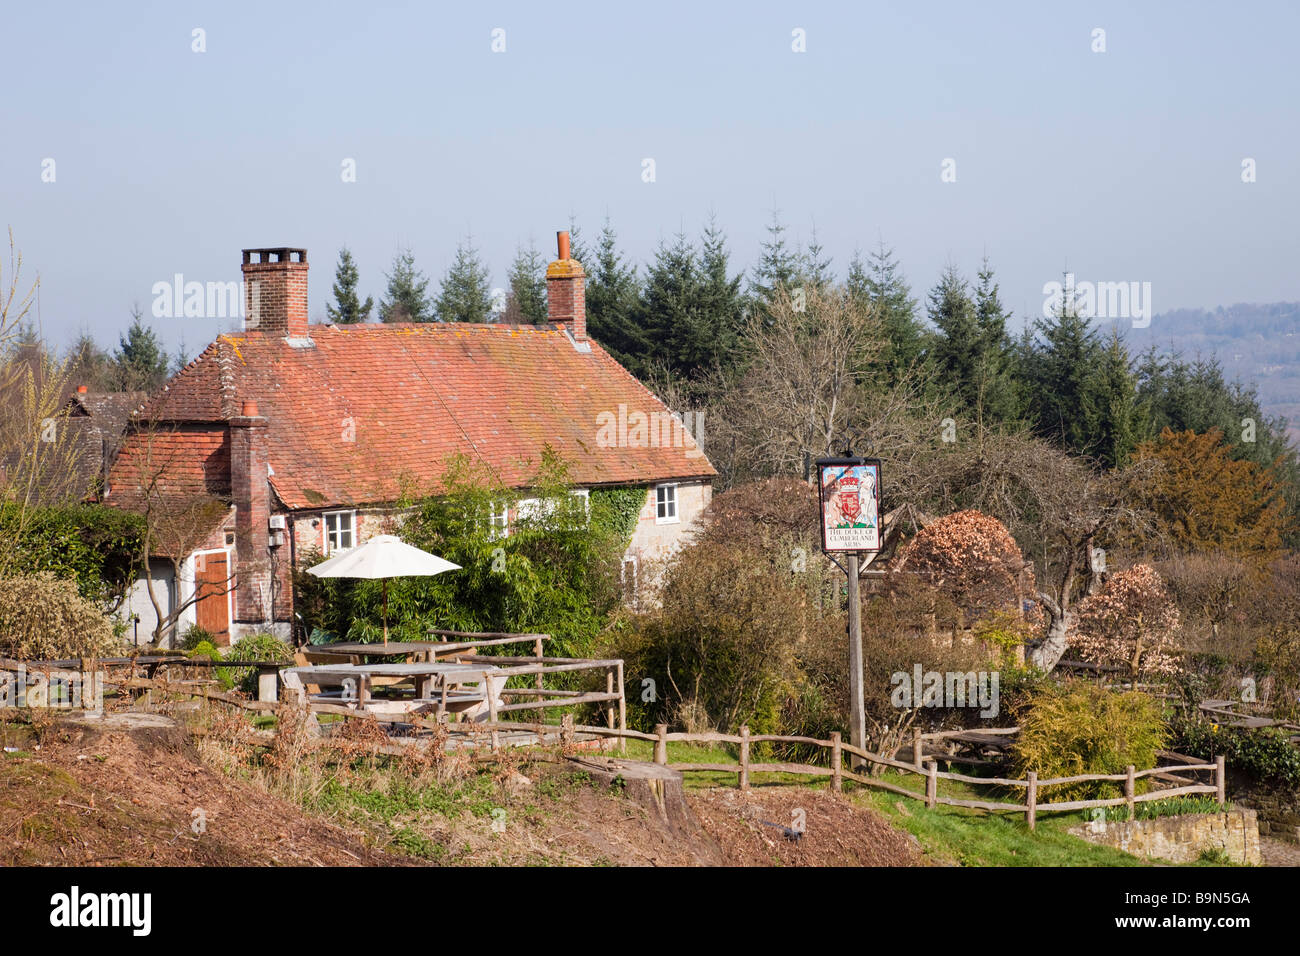 The Duke of Cumberland old country pub in hamlet in South Downs National Park, Henley, near Midhurst, West Sussex, England, UK Stock Photo